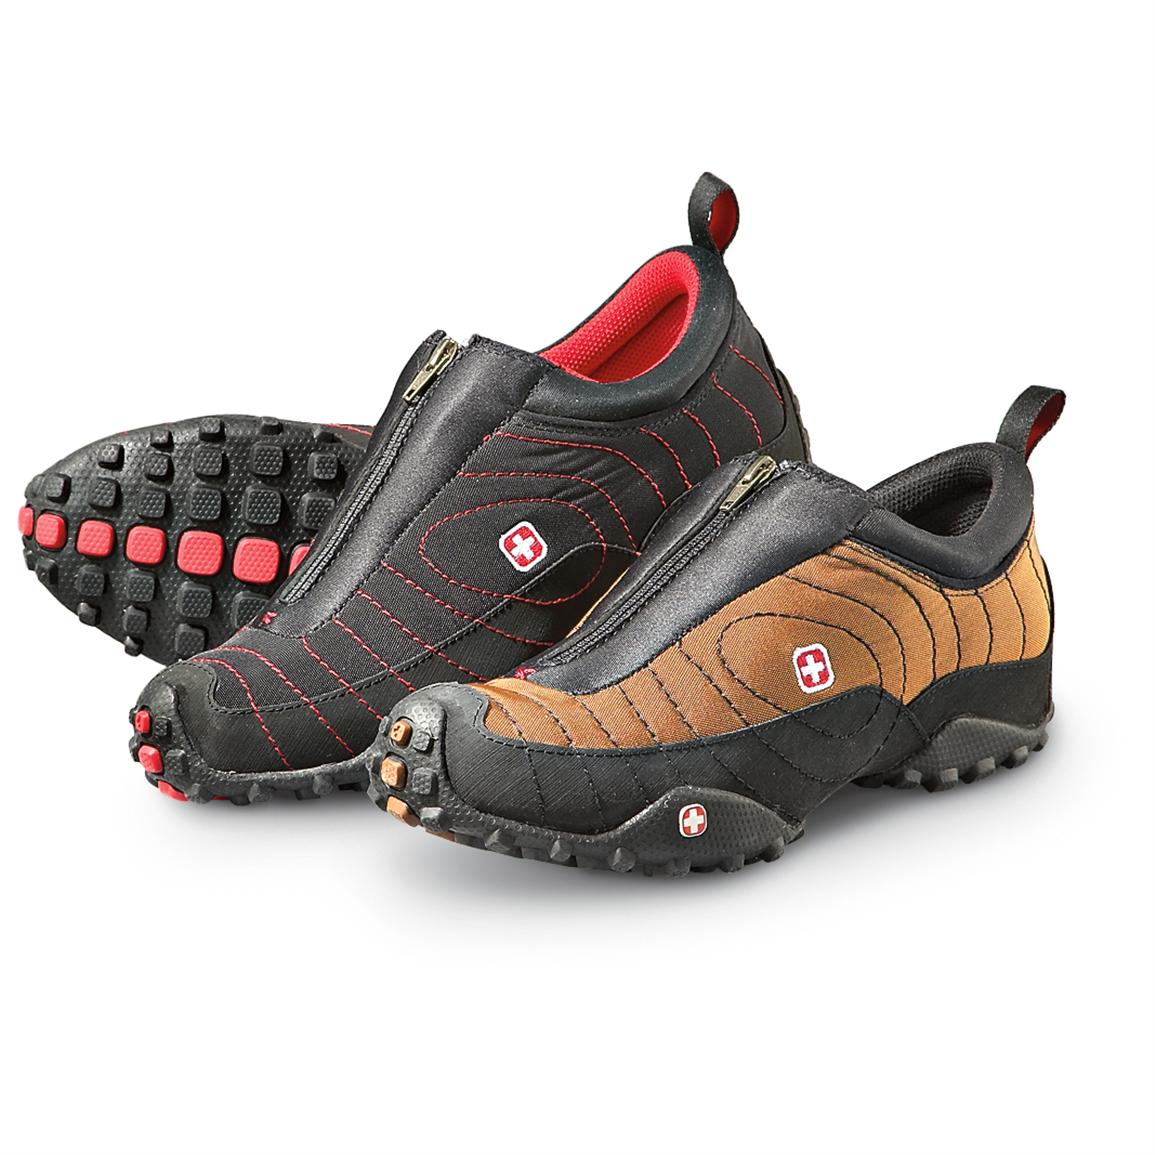 Swiss Army Albinen Low Hiking Shoes 